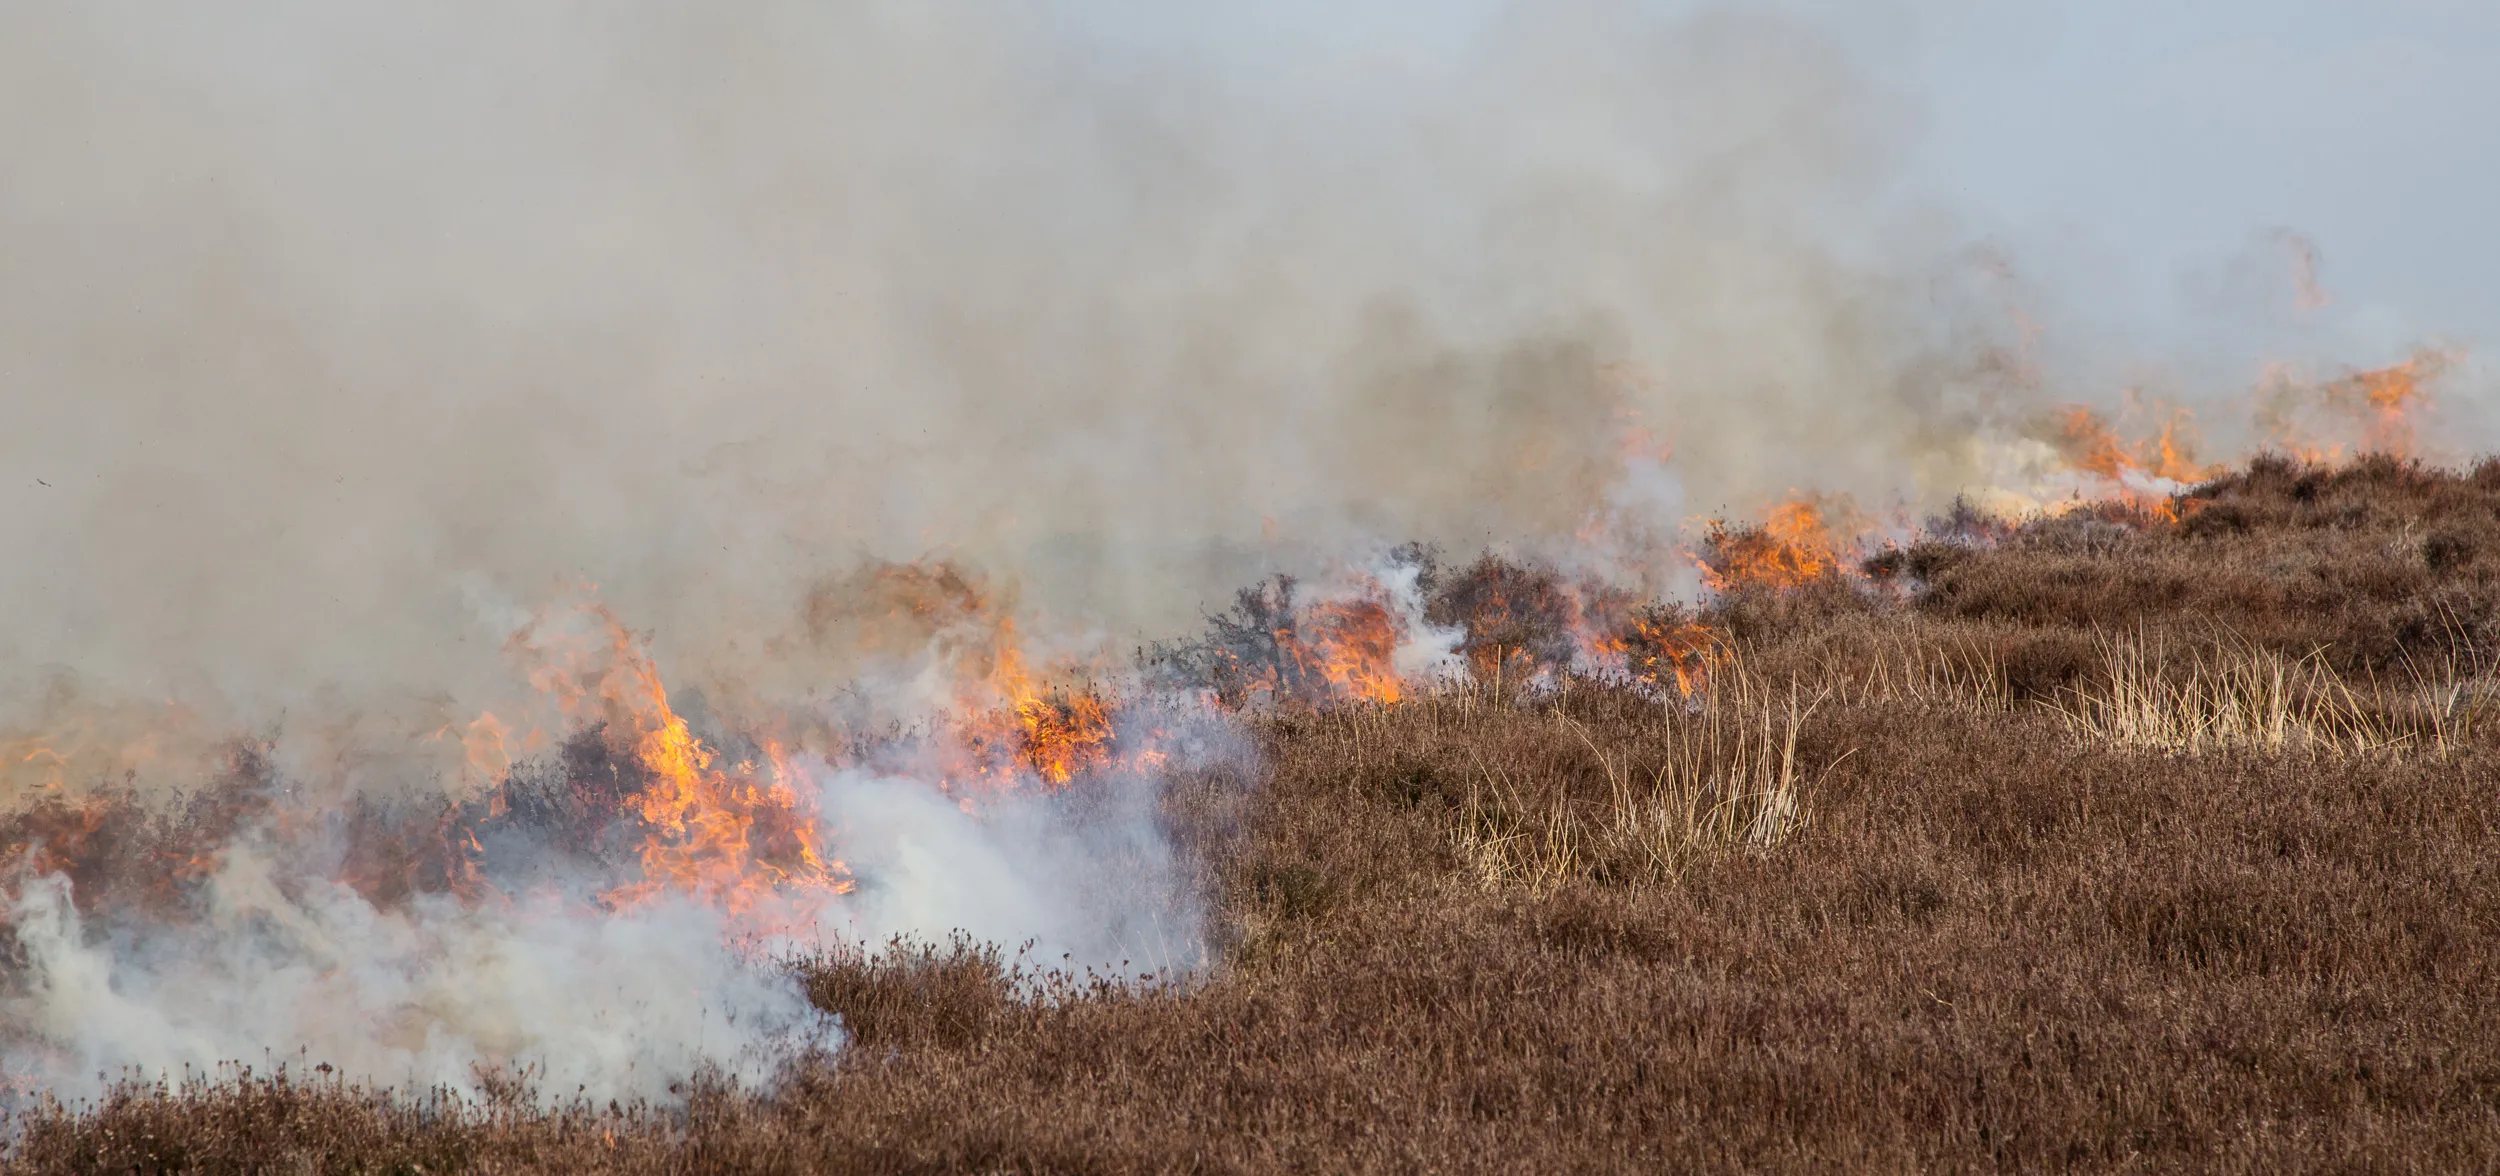 Heather burning on the North York Moors as part of grouse moor management. New shoots will grow from the burnt heather to feed next year's young game birds.